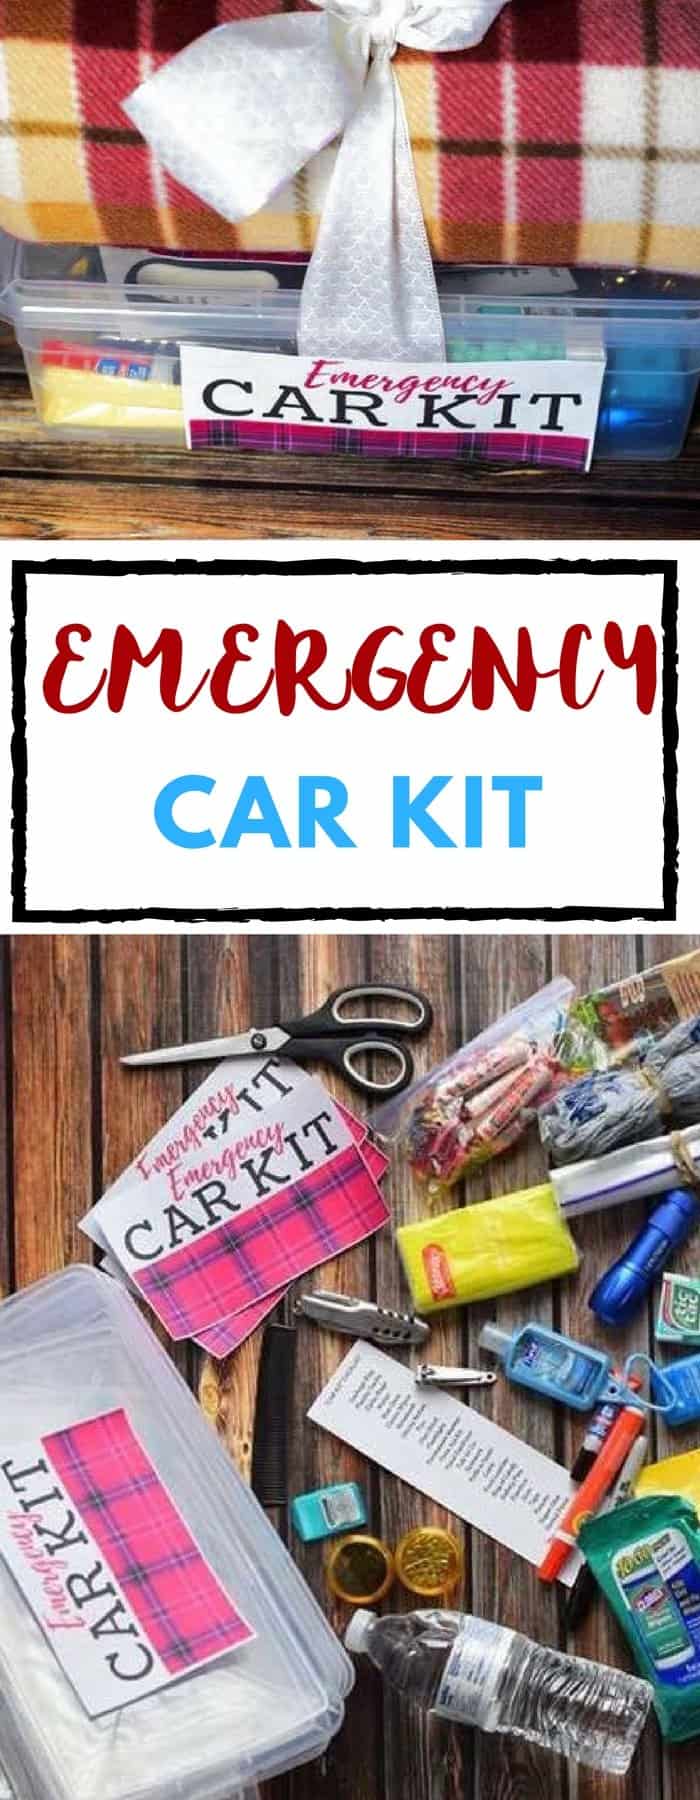 Emergency car kit, with a list of almost everything you could think of! So helpful